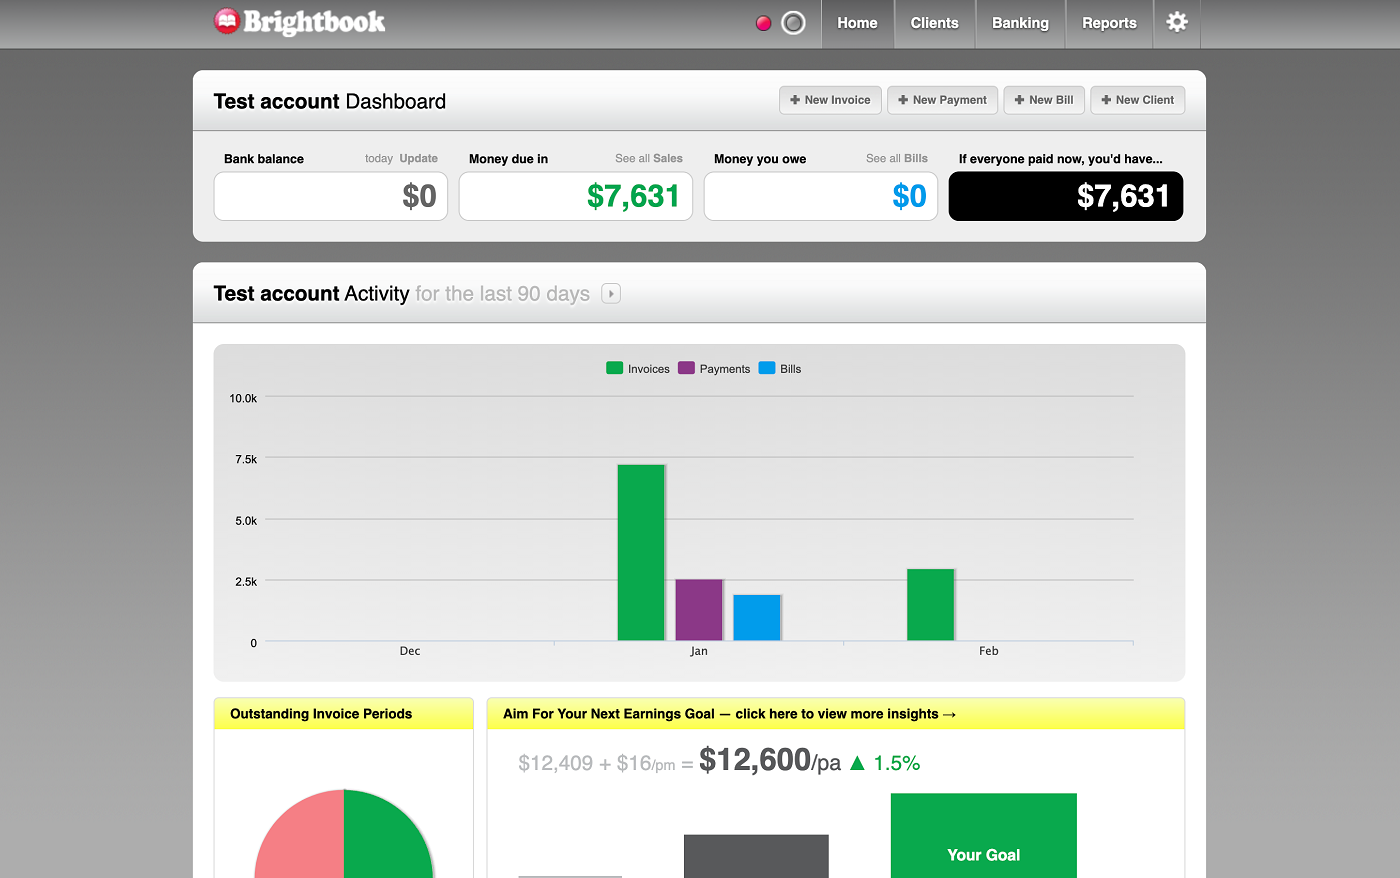 Brightbook offers a couple color options for your invoices so you can choose based on your business’s style.